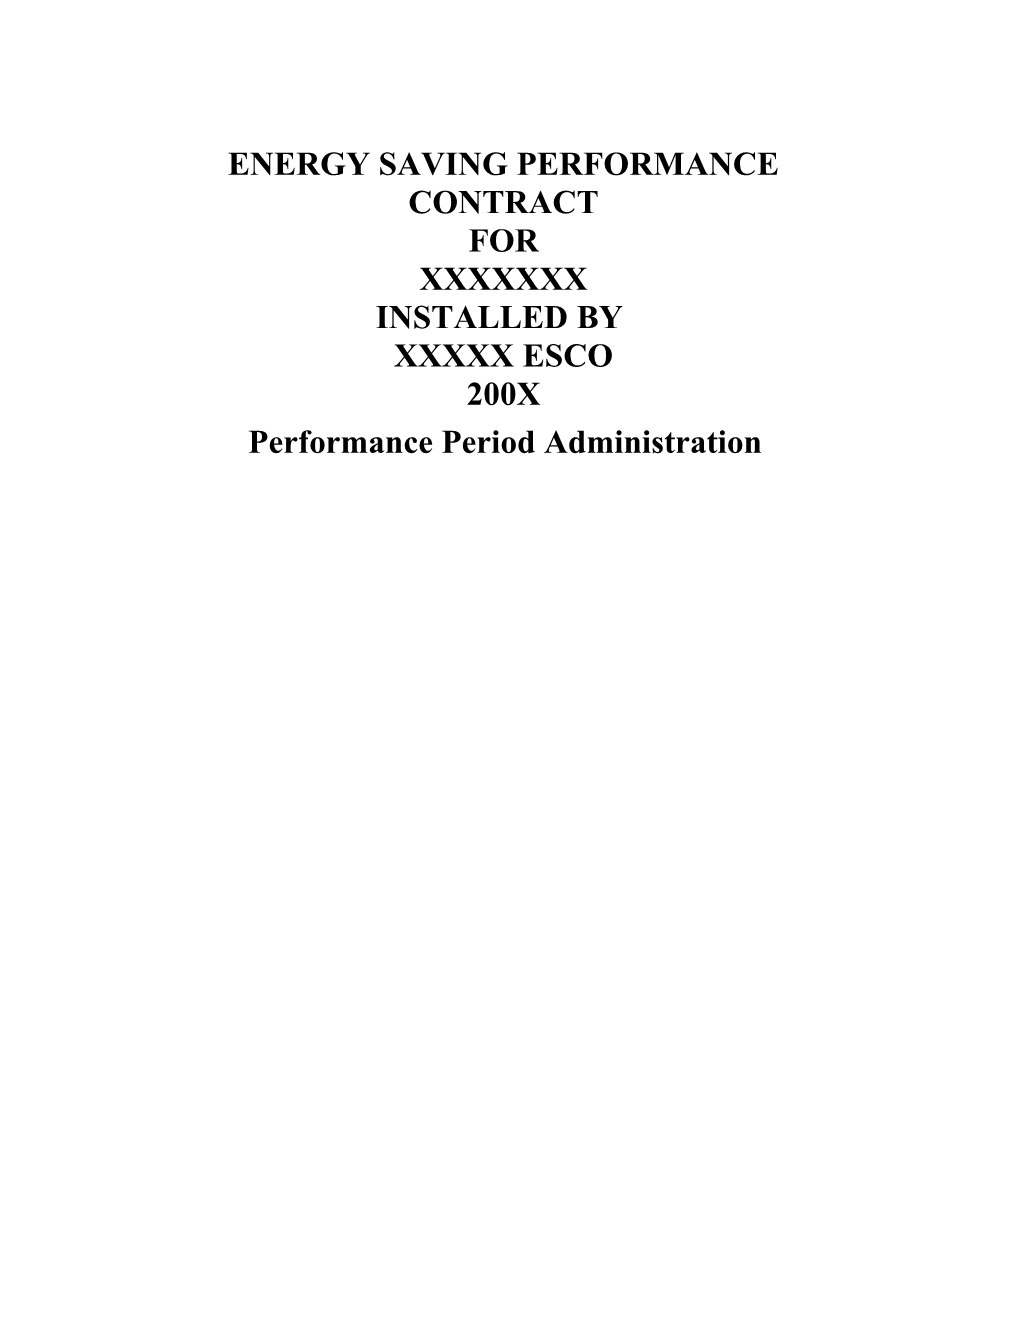 Draft Performance Period Administration Document